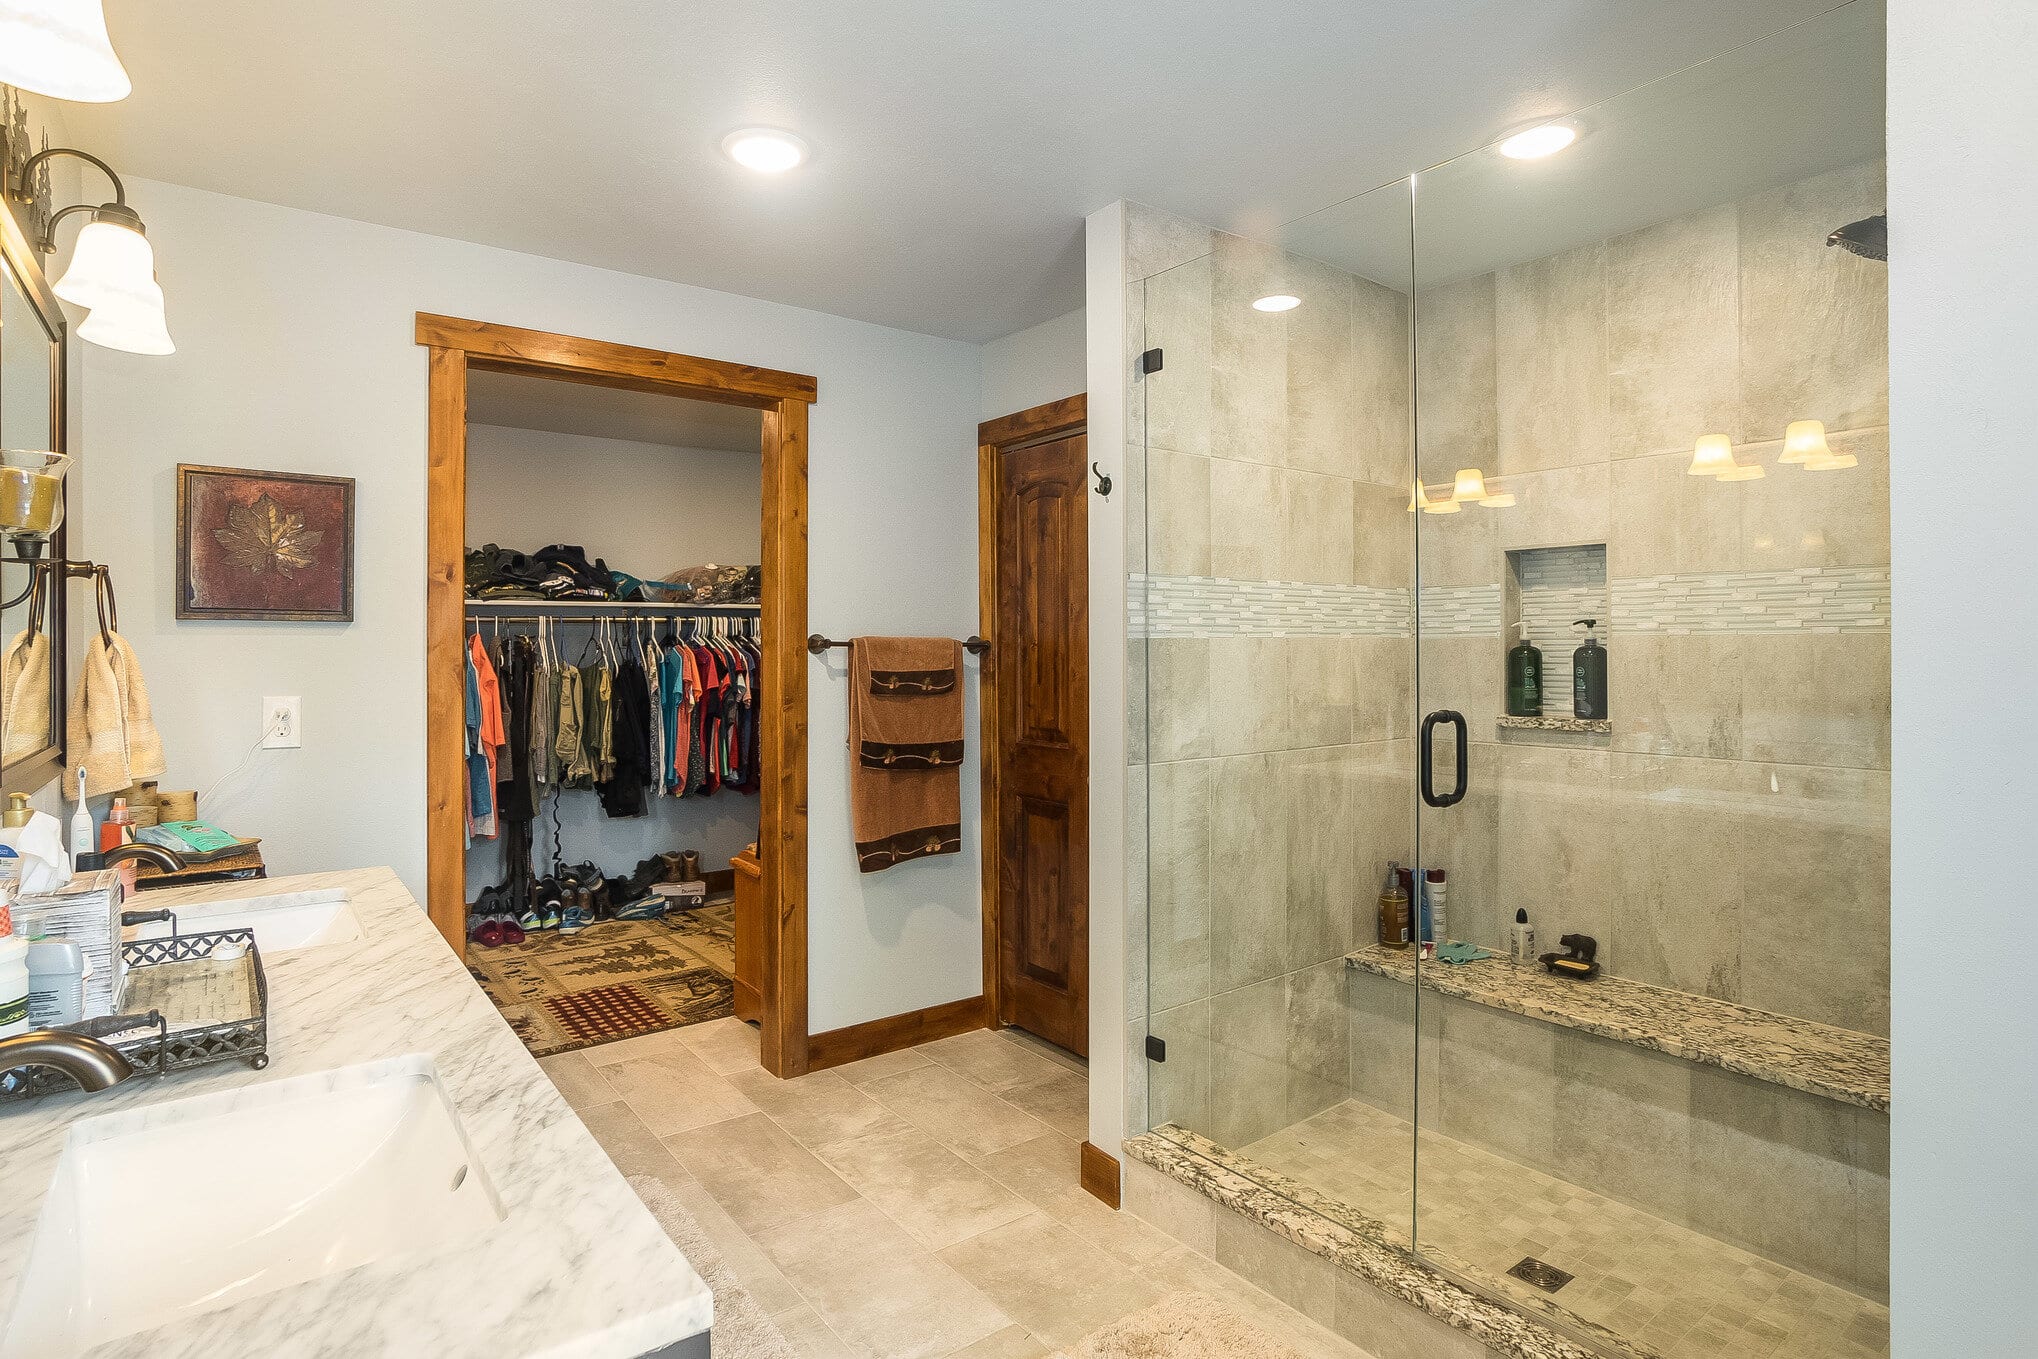 Large bathroom with shower and walk-in closet